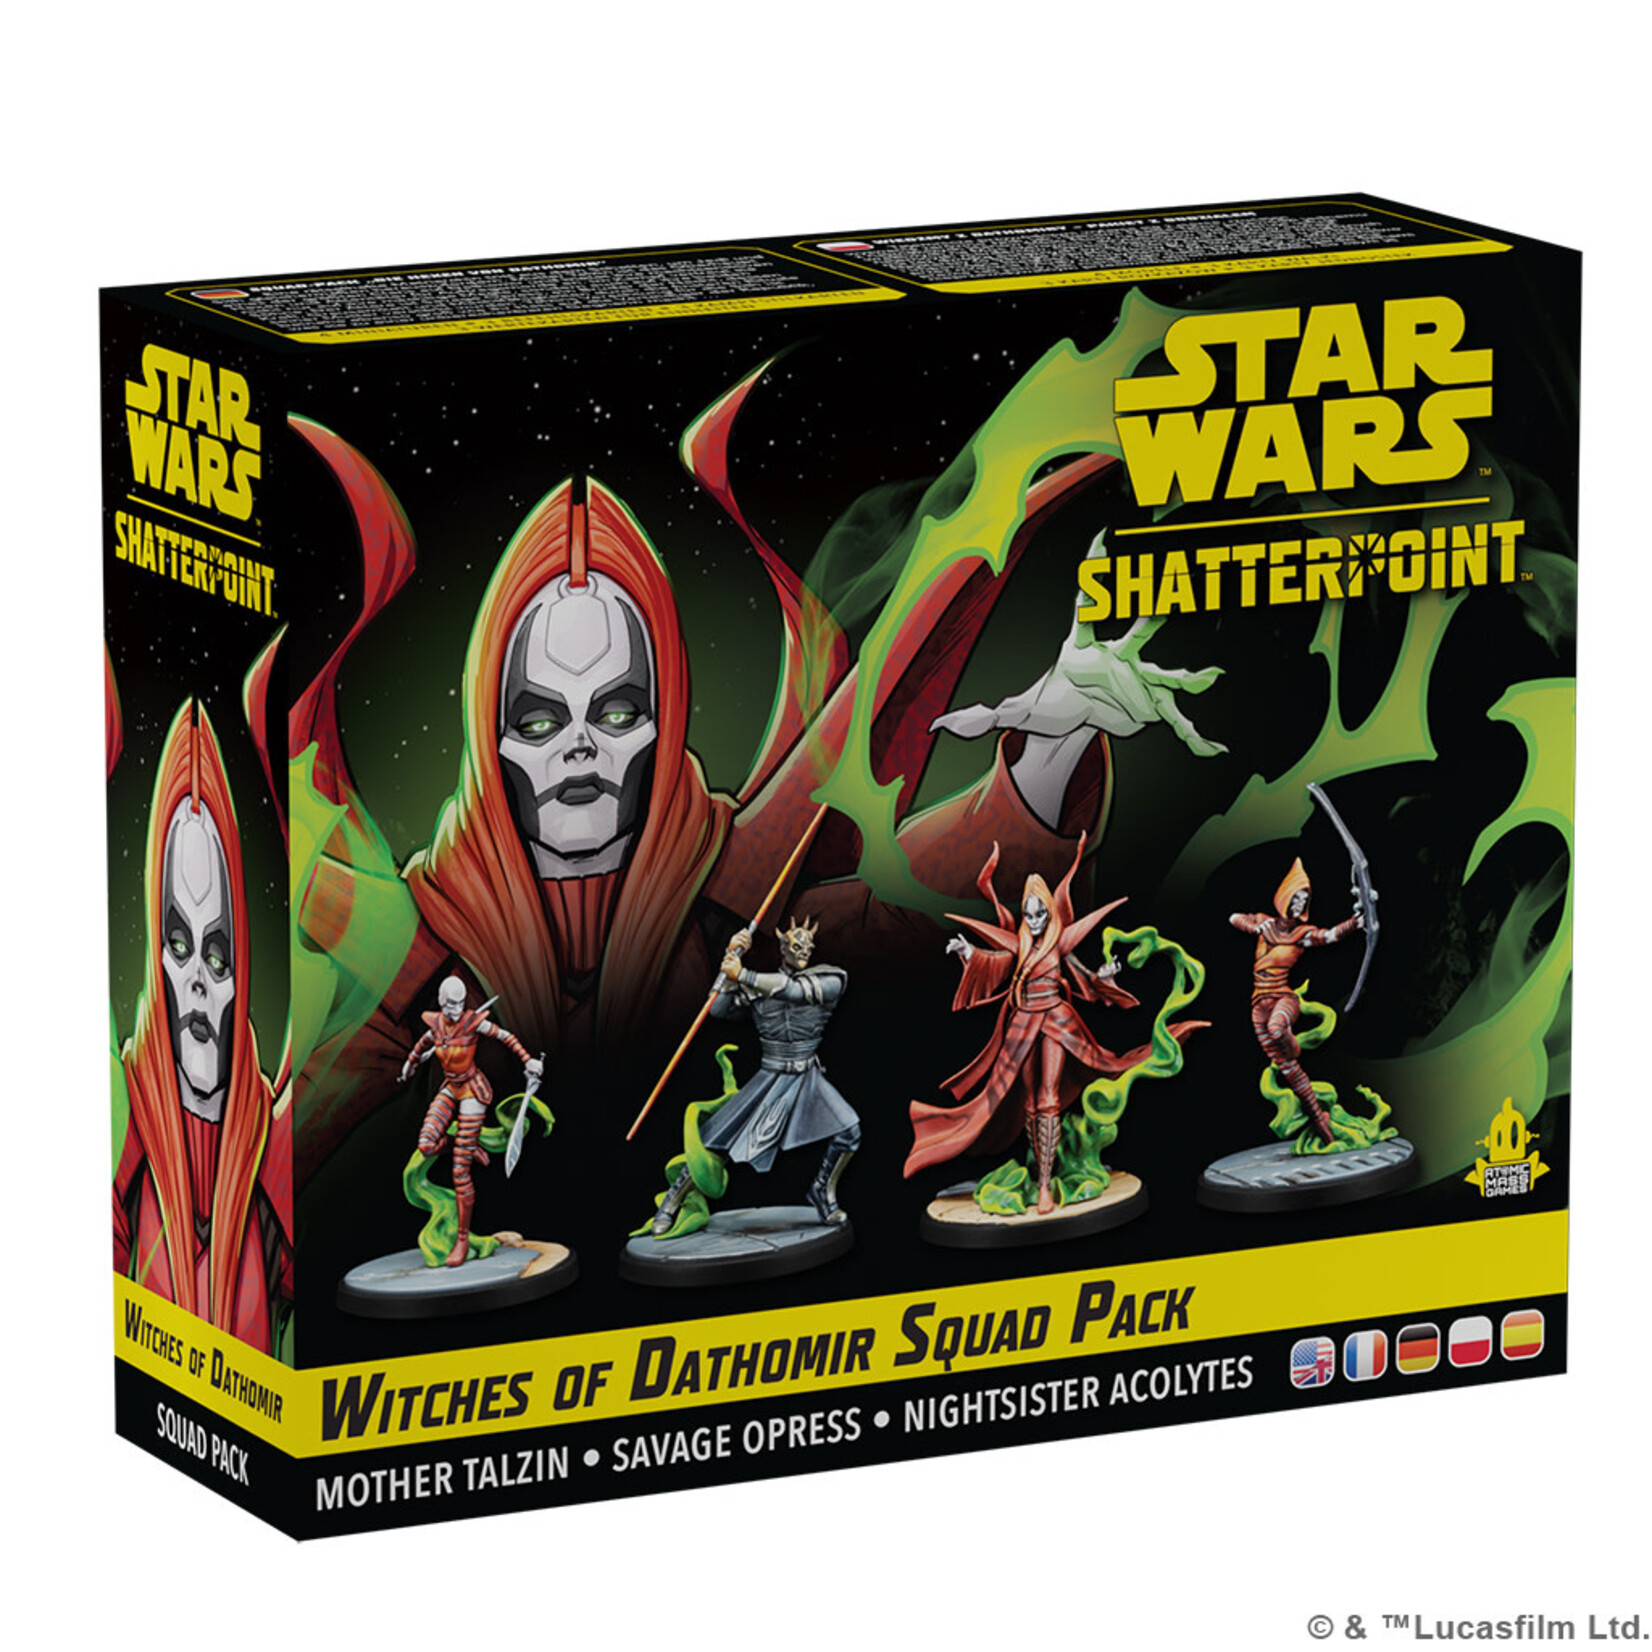 Asmodee Star Wars: Shatterpoint Witches of Dathomir Mother Talzin Squad Pack